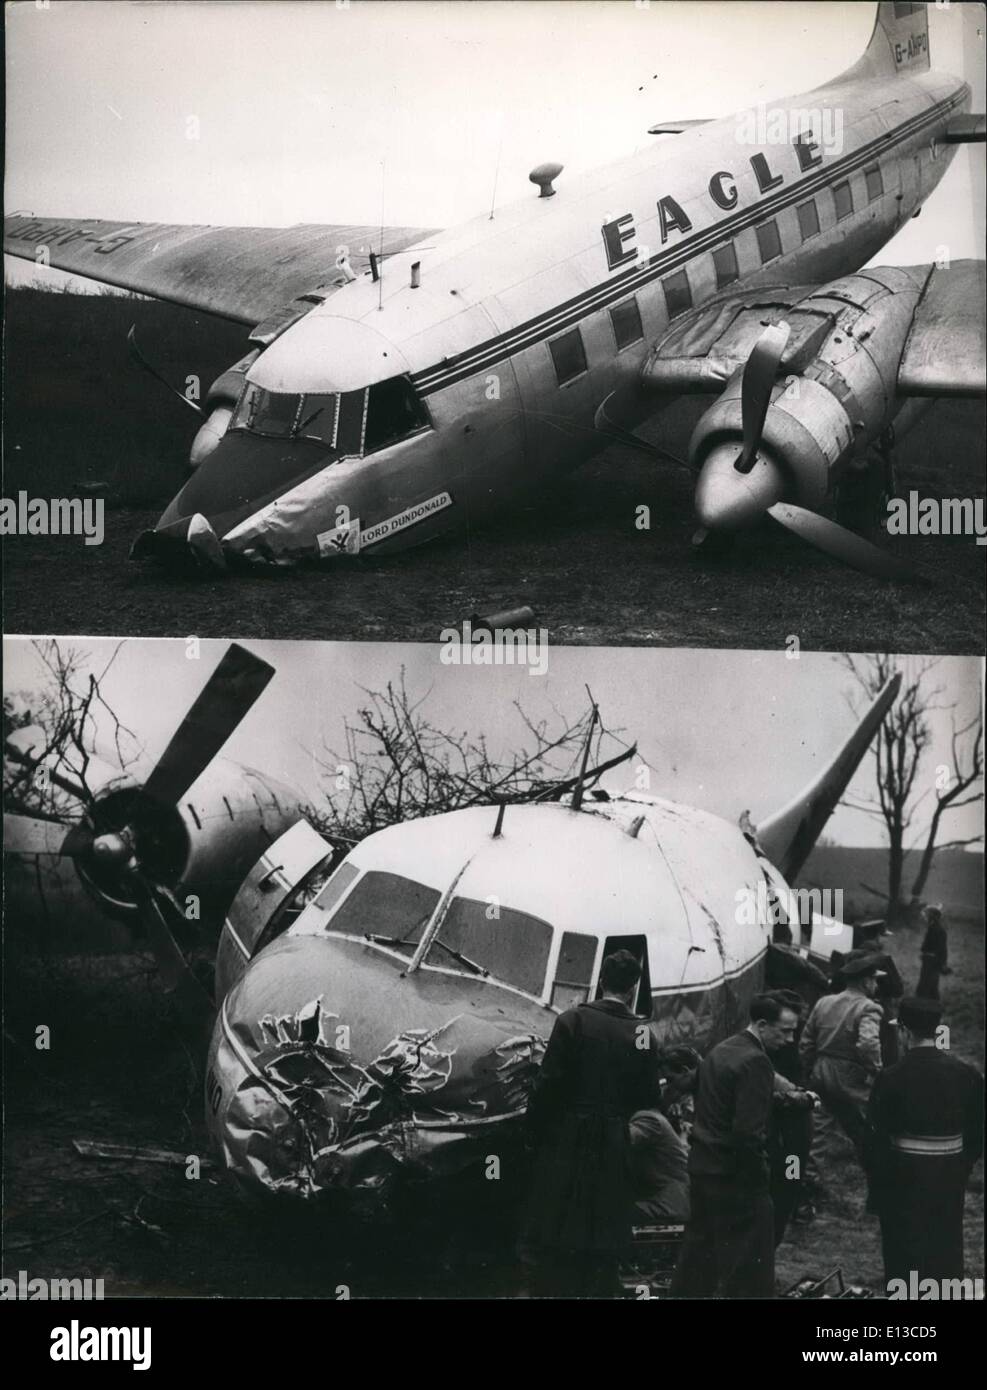 Feb. 29, 2012 - Aircrashes in Germany and sw on the airfield of fuerth ne aeroplane crashed in a field  accident was caused by ice  exept tow pigs, ''Members''  Jugoslavia . (upper picture)  appendix the pilot of the  chard, looks after the dama picture below saturday eve  crashed in for near airfield  was kille, seven passenger the skottish singer Margaret. Munich Picture Stock Photo